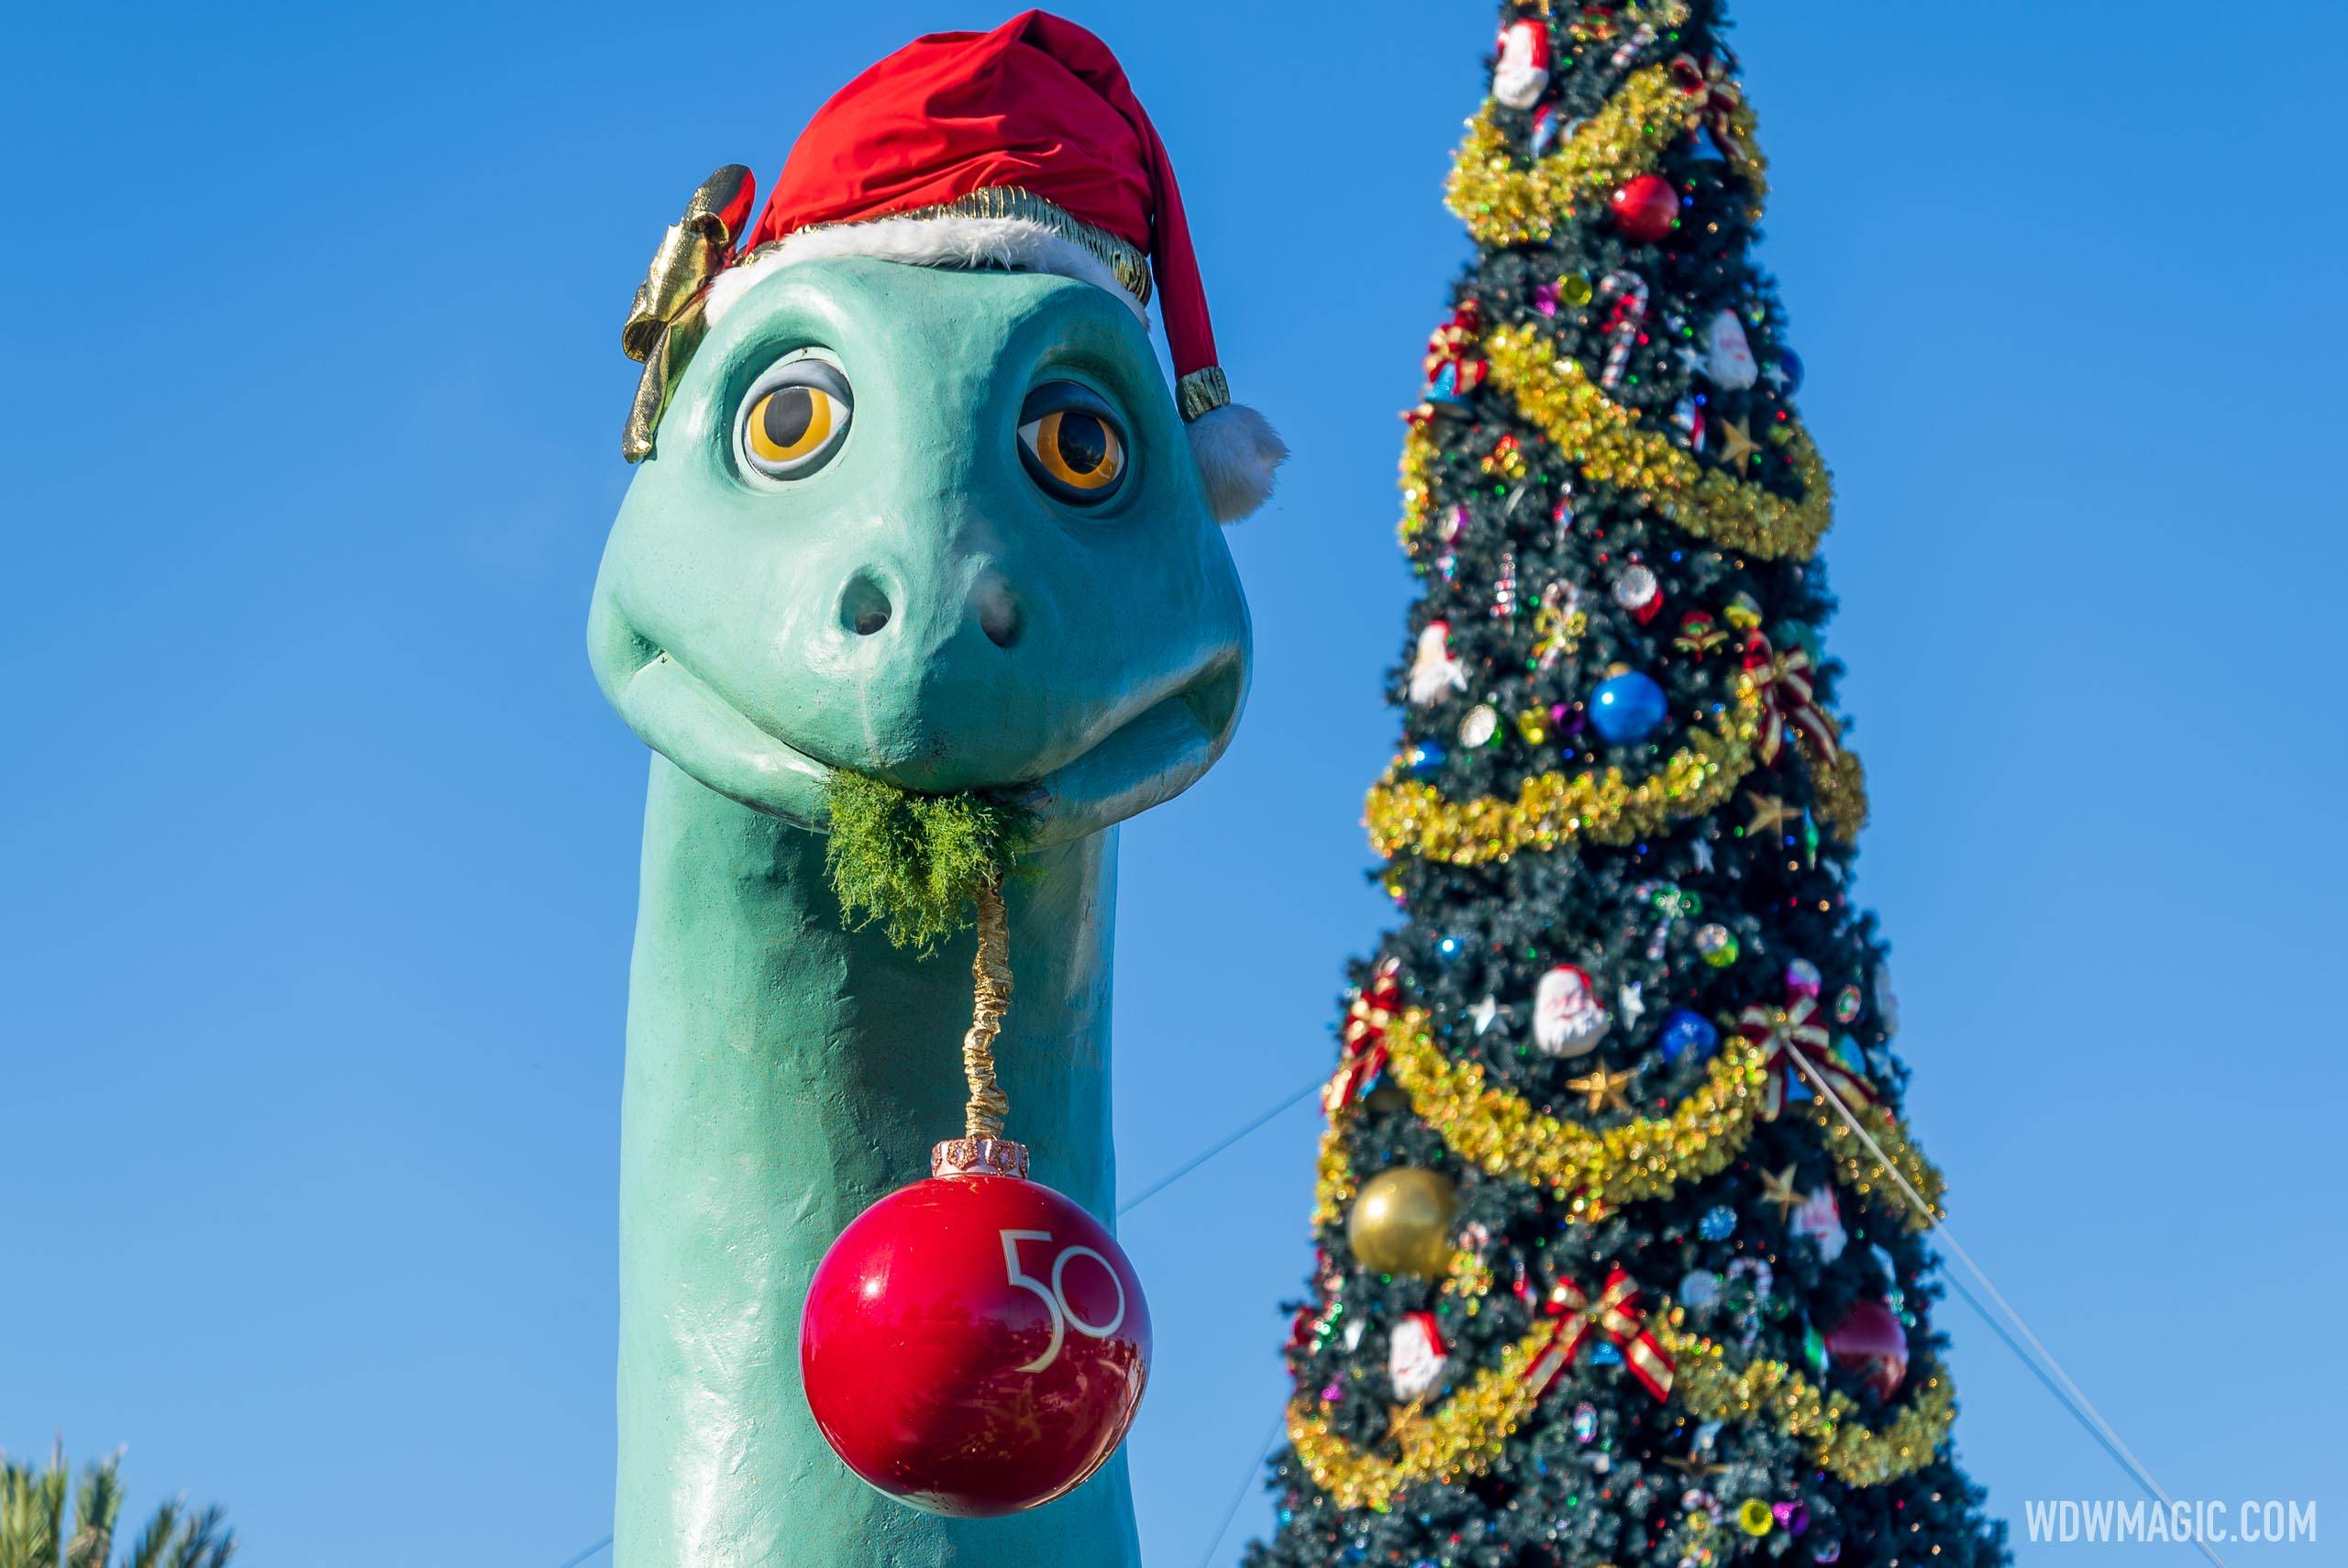 A look at this year's holiday decor in Disney's Hollywood Studios